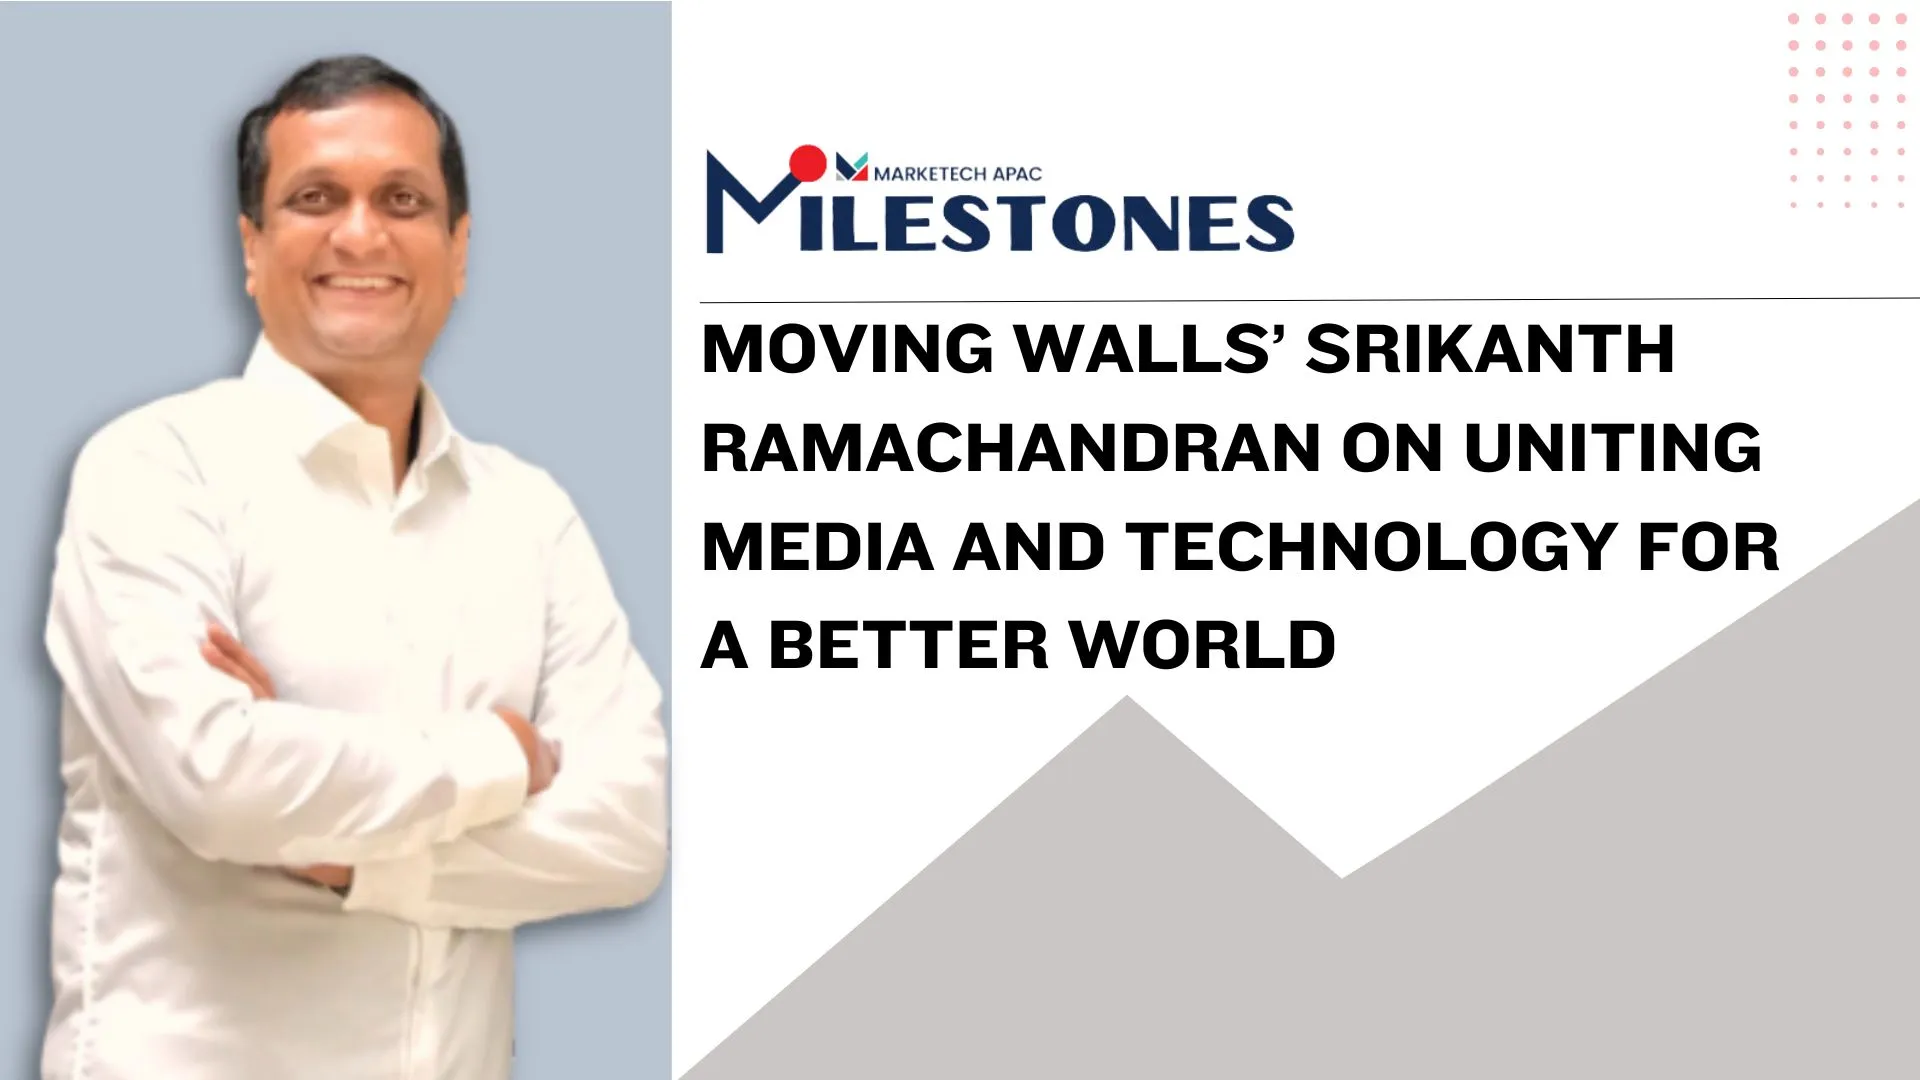 Milestones: Moving Walls’ Srikanth Ramachandran on uniting media and technology for a better world